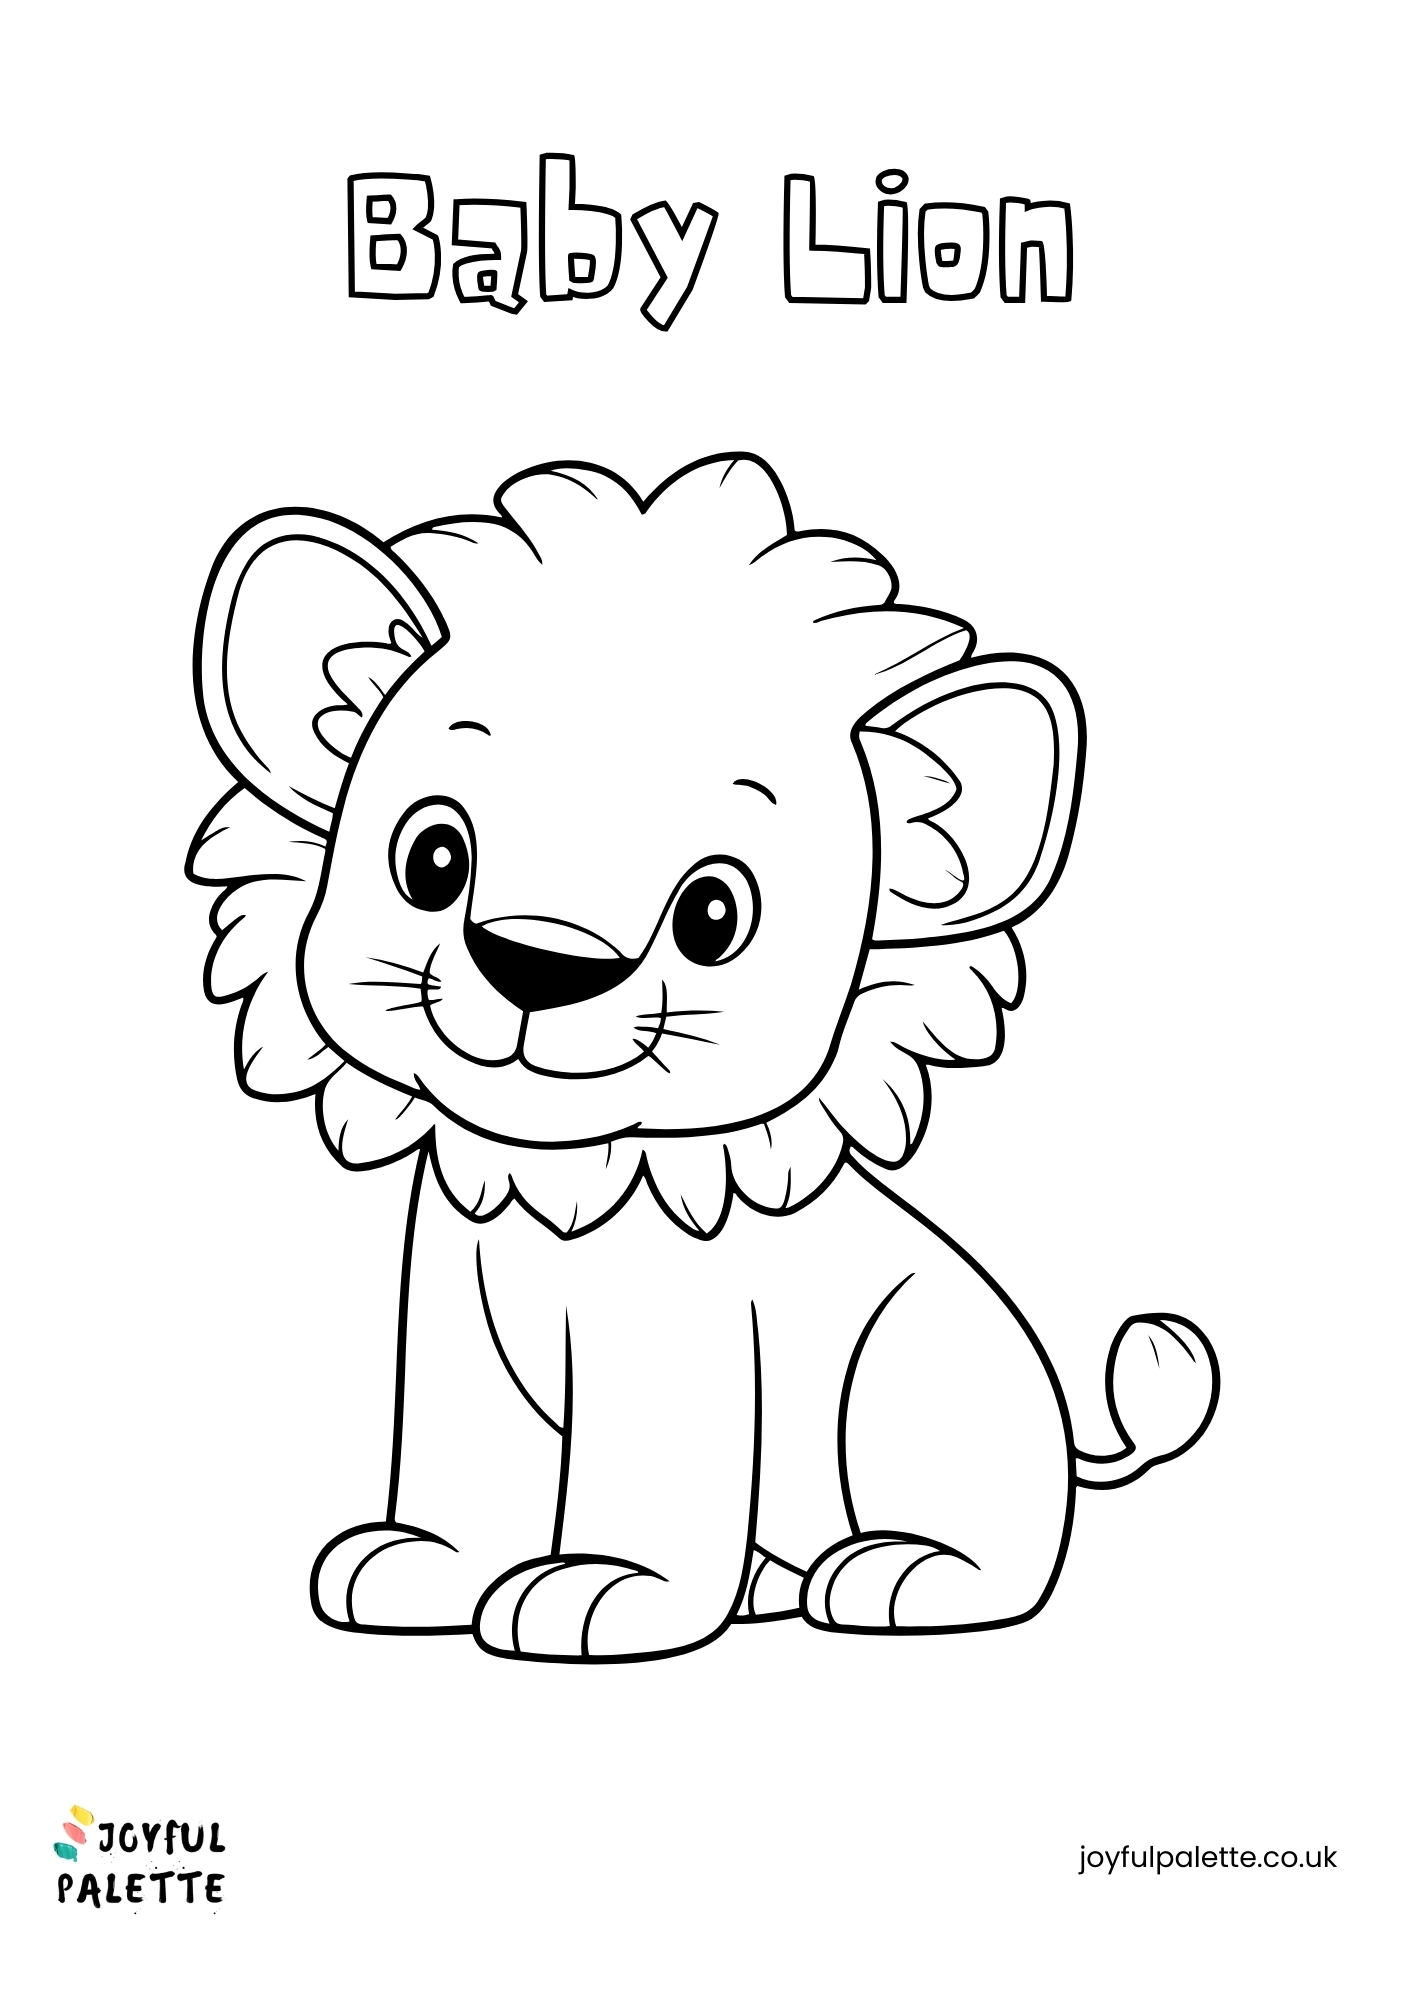 Baby Lion Coloring Page for Kids